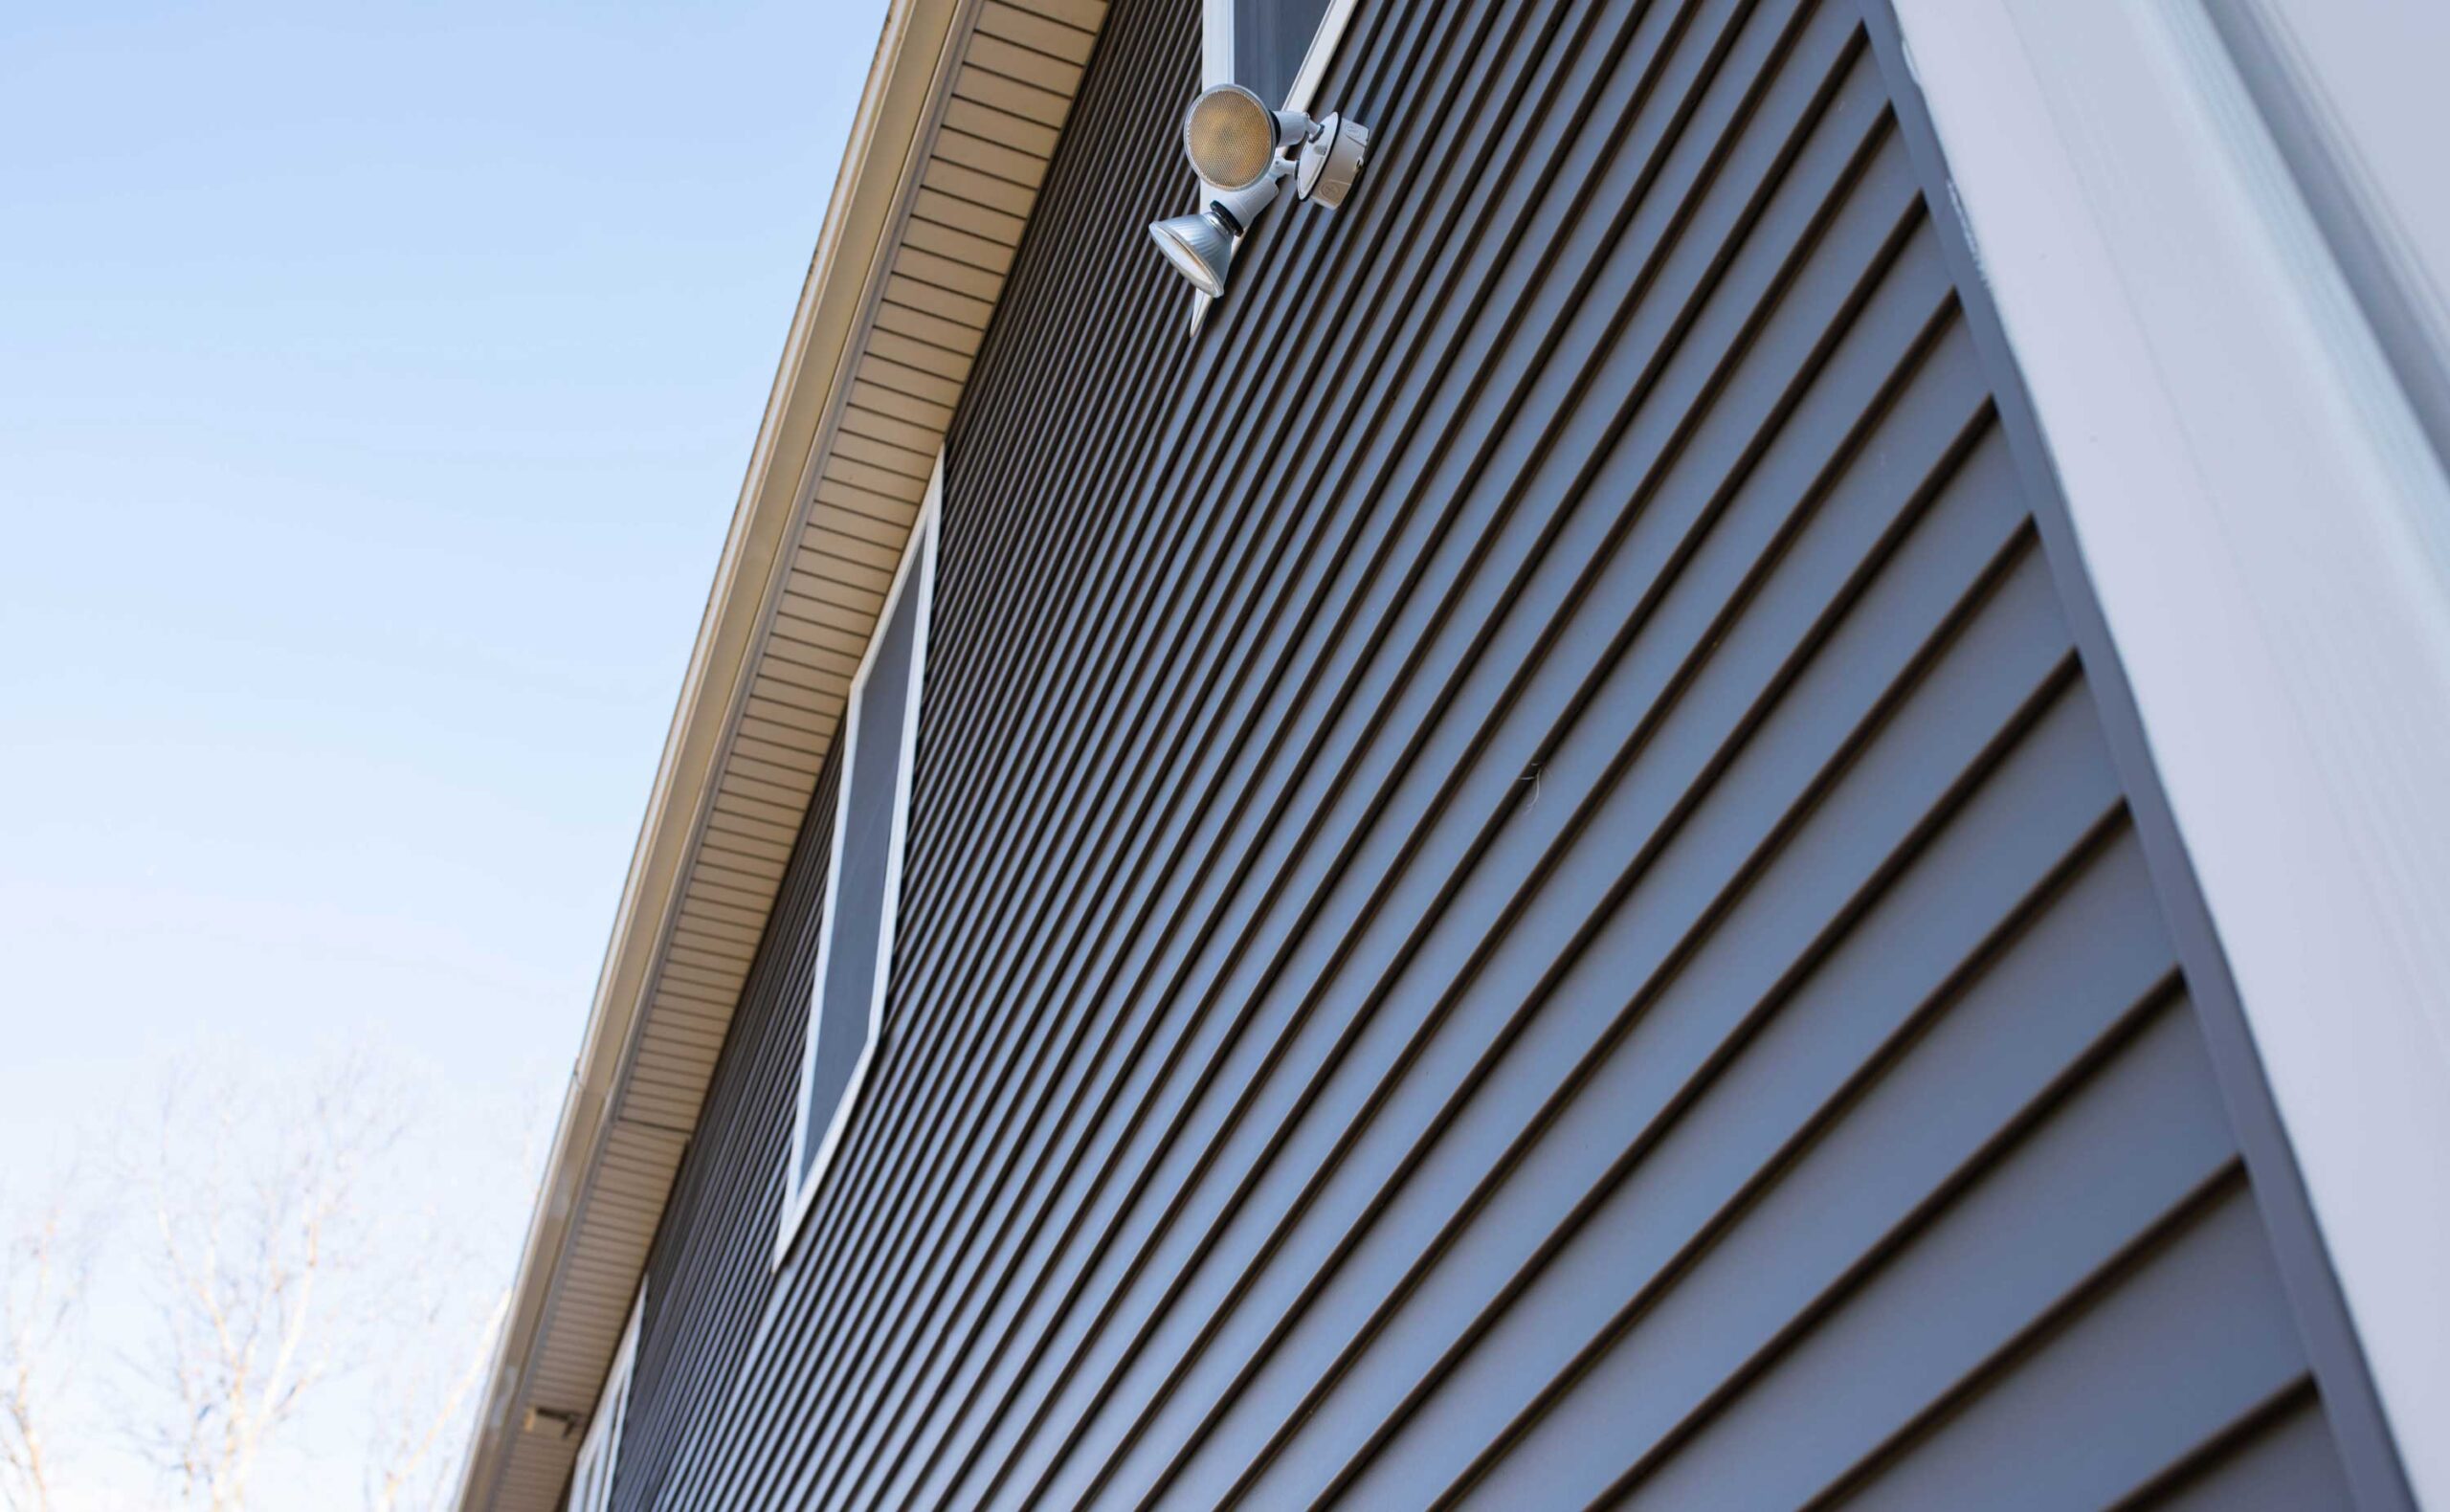 The image captures the architectural details of a house, focusing on the contrasting textures and colors between the beige horizontal siding and the dark vertical siding, accented by a white trim and a security light fixture, under a clear blue sky.